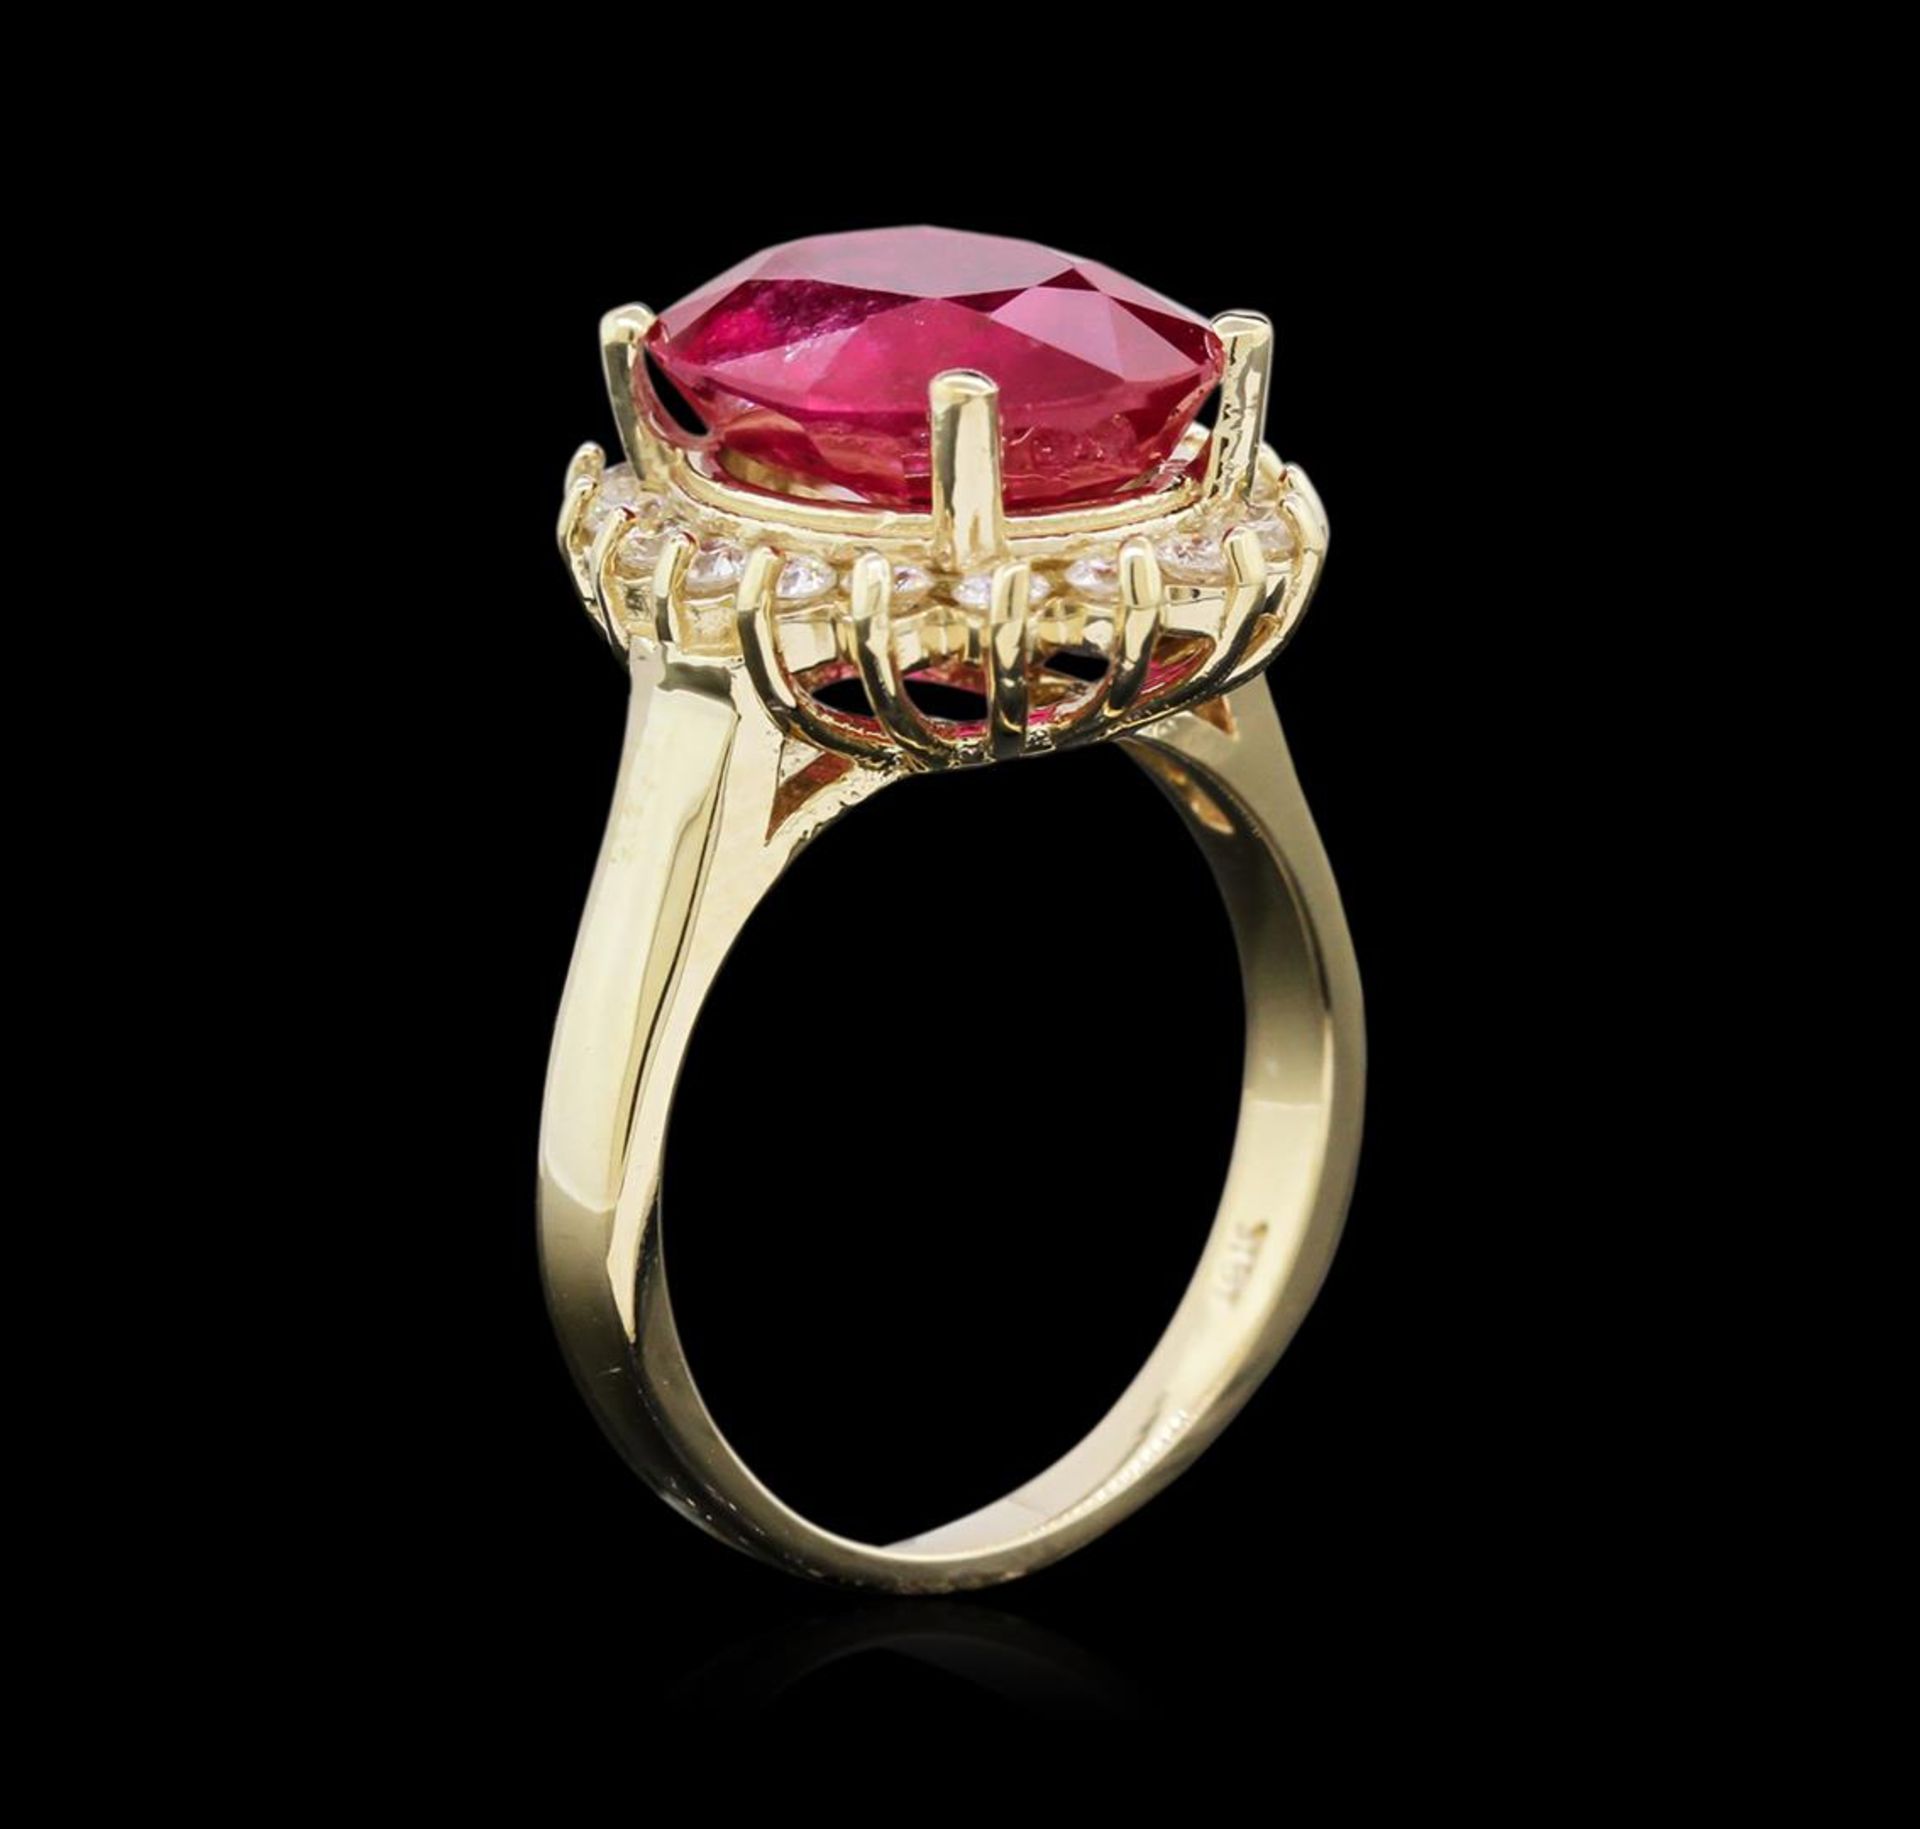 6.50 ctw Ruby and Diamond Ring - 14KT Yellow Gold - Image 3 of 3